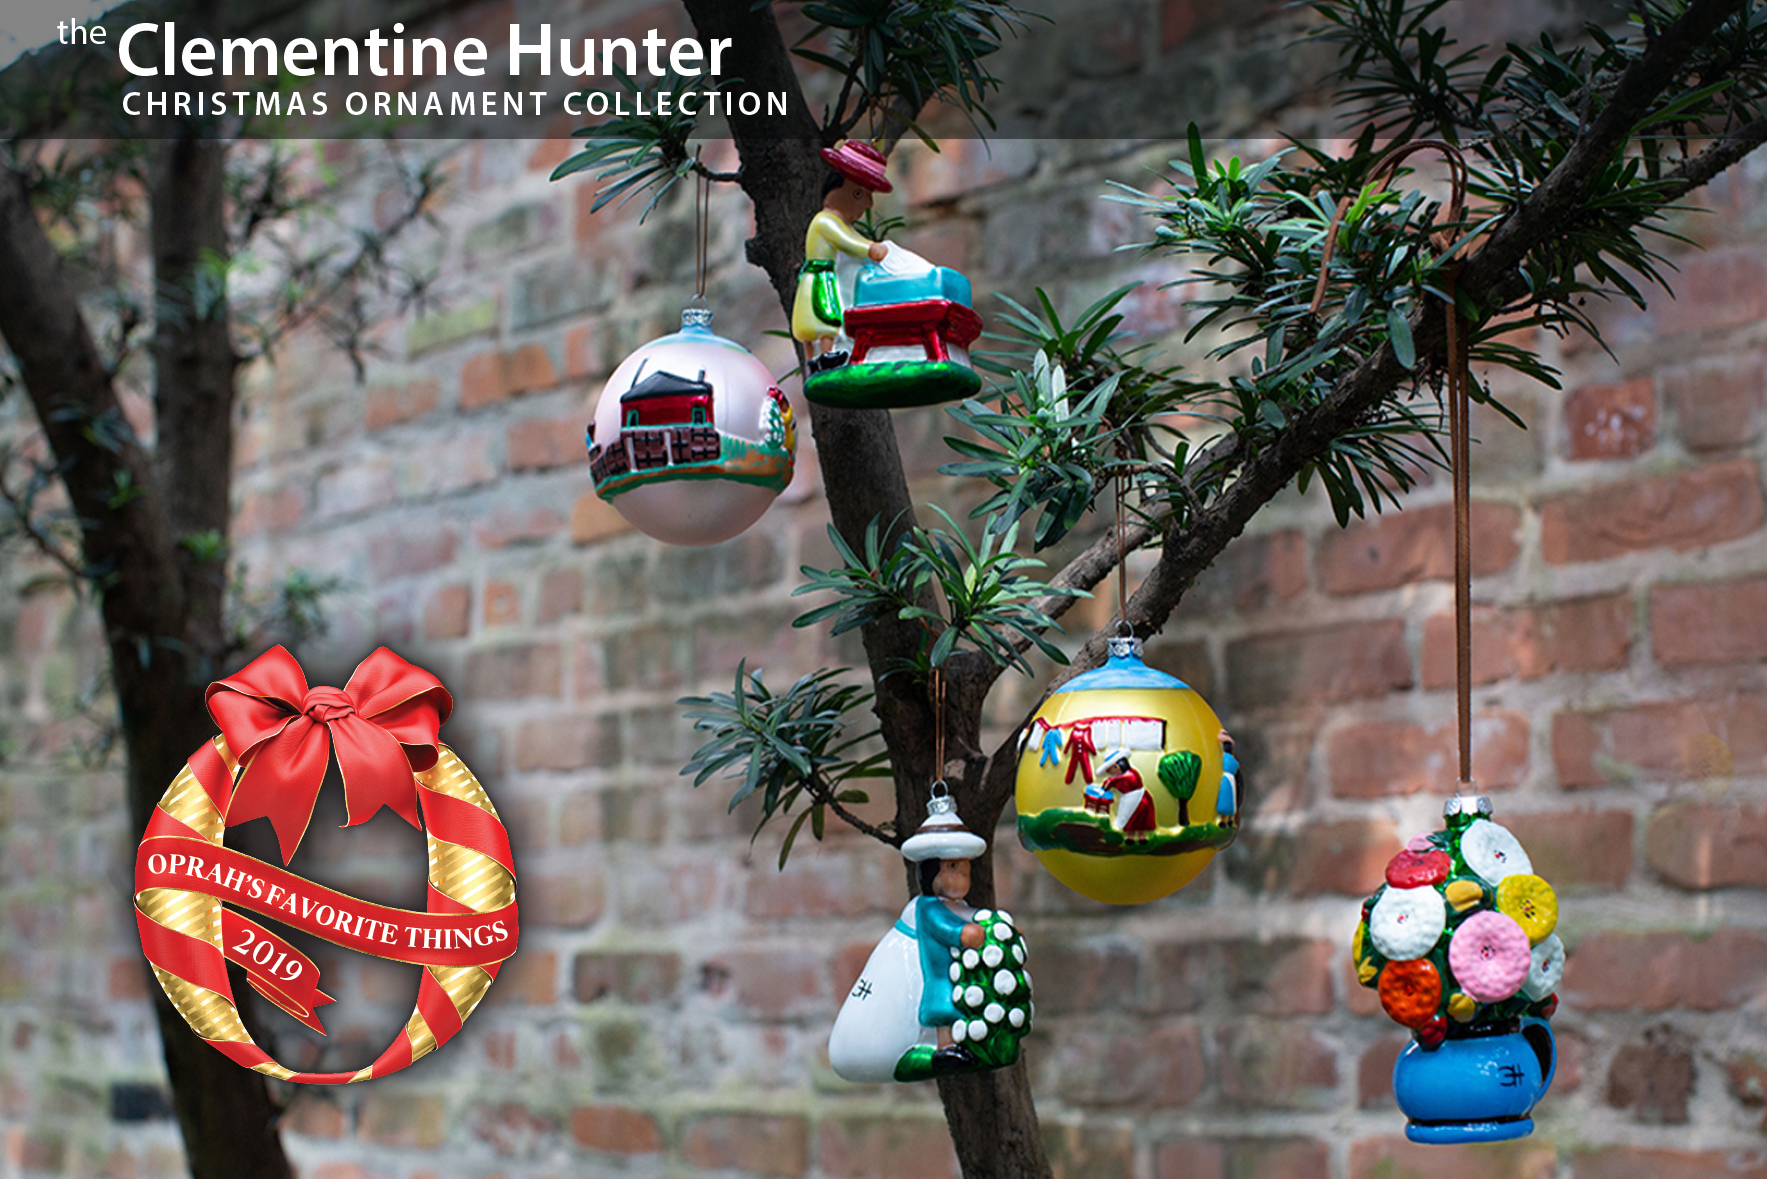 The Clementine Hunter Christmas Ornament Collection